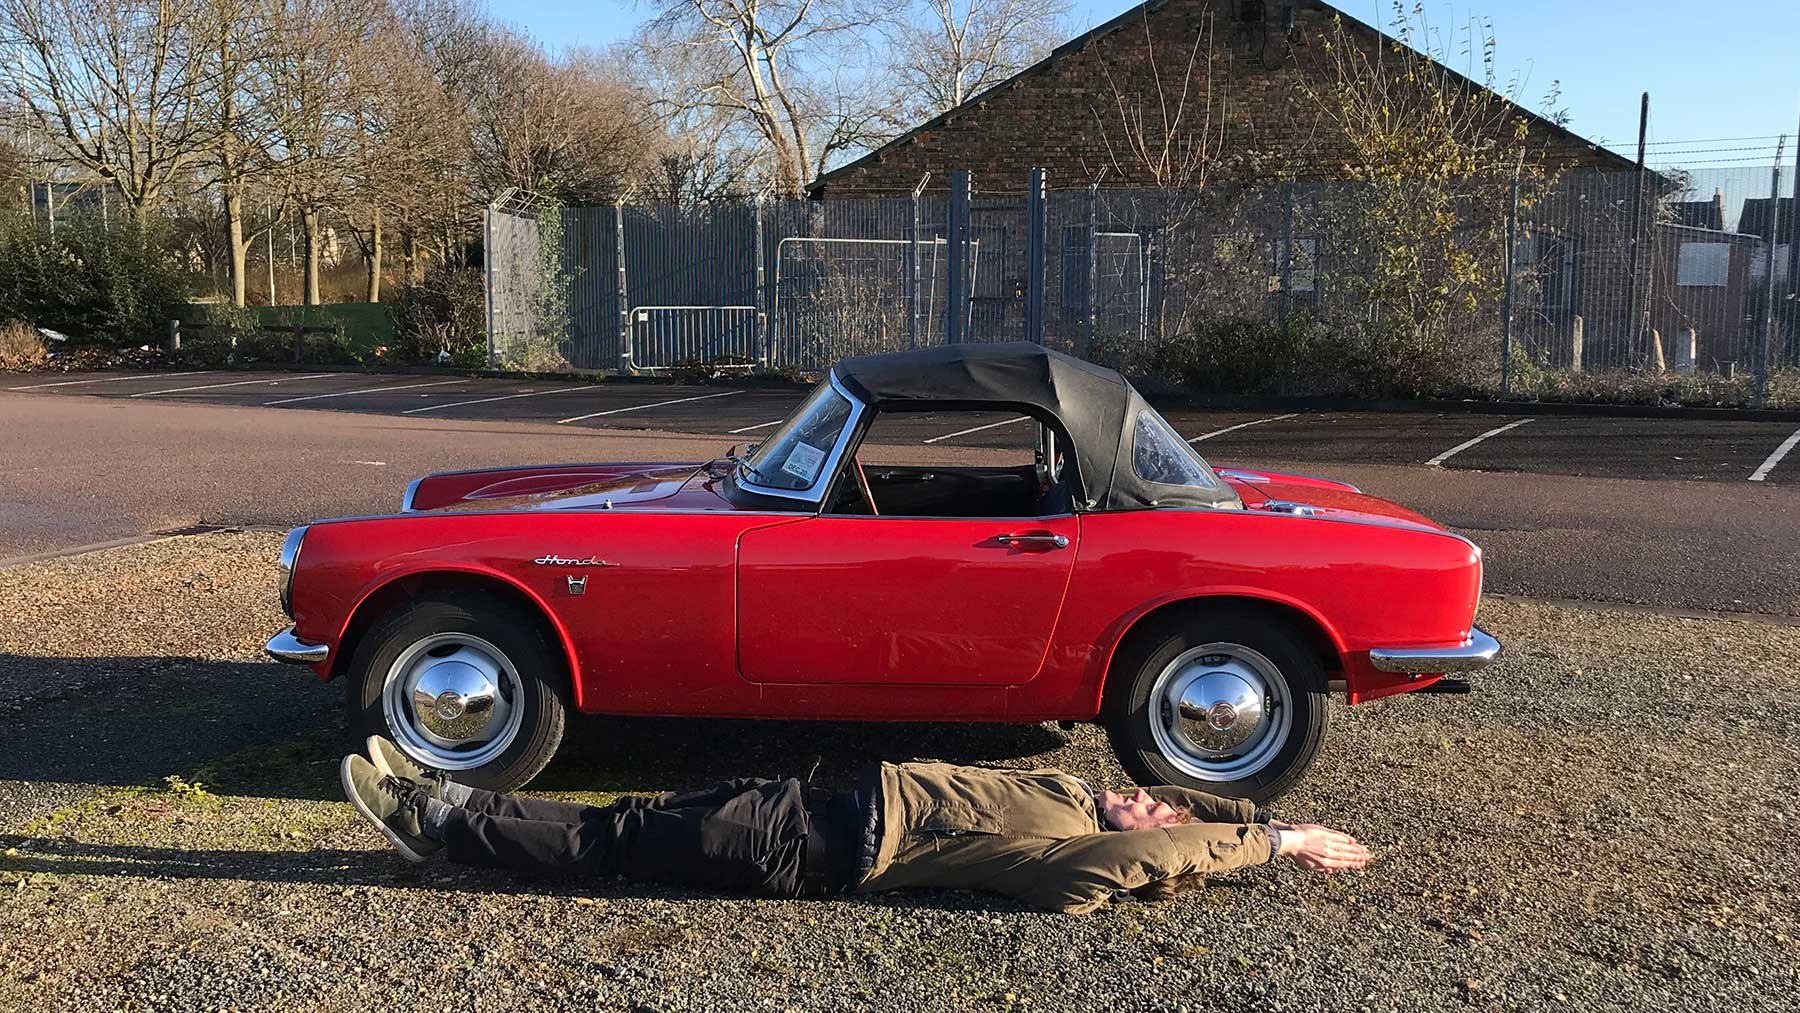 Honda S800 is small: CAR magazine's James Taylor for scale!